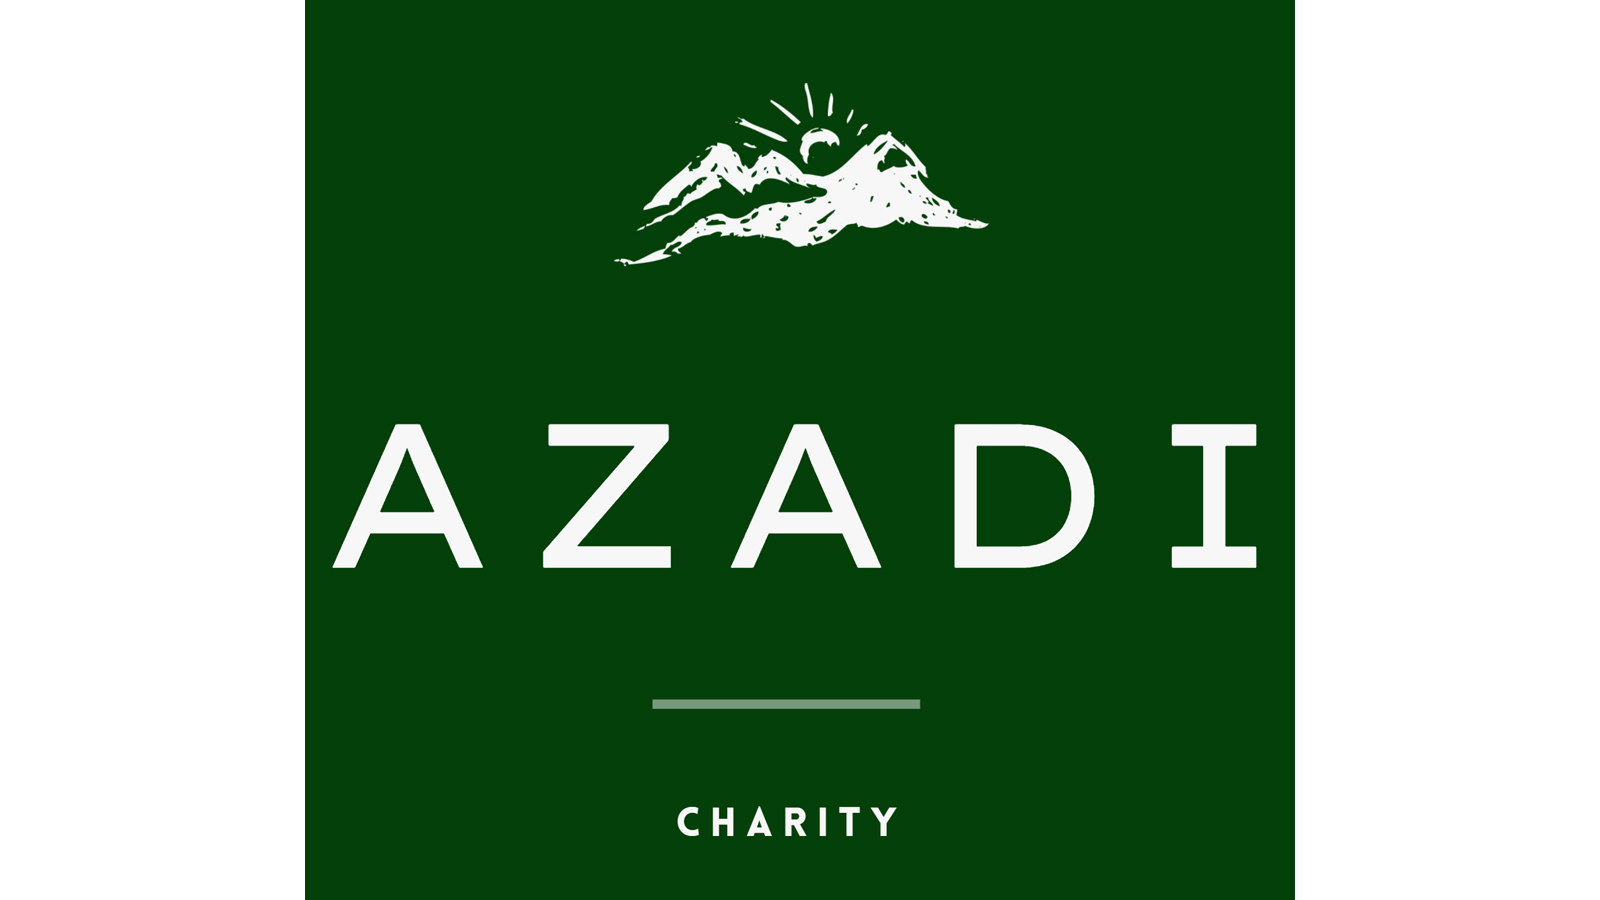 Cornwall Street Barristers’ call for support for Azadi Charity’s 72 hour #HelpTalibanTargets campaign ￼